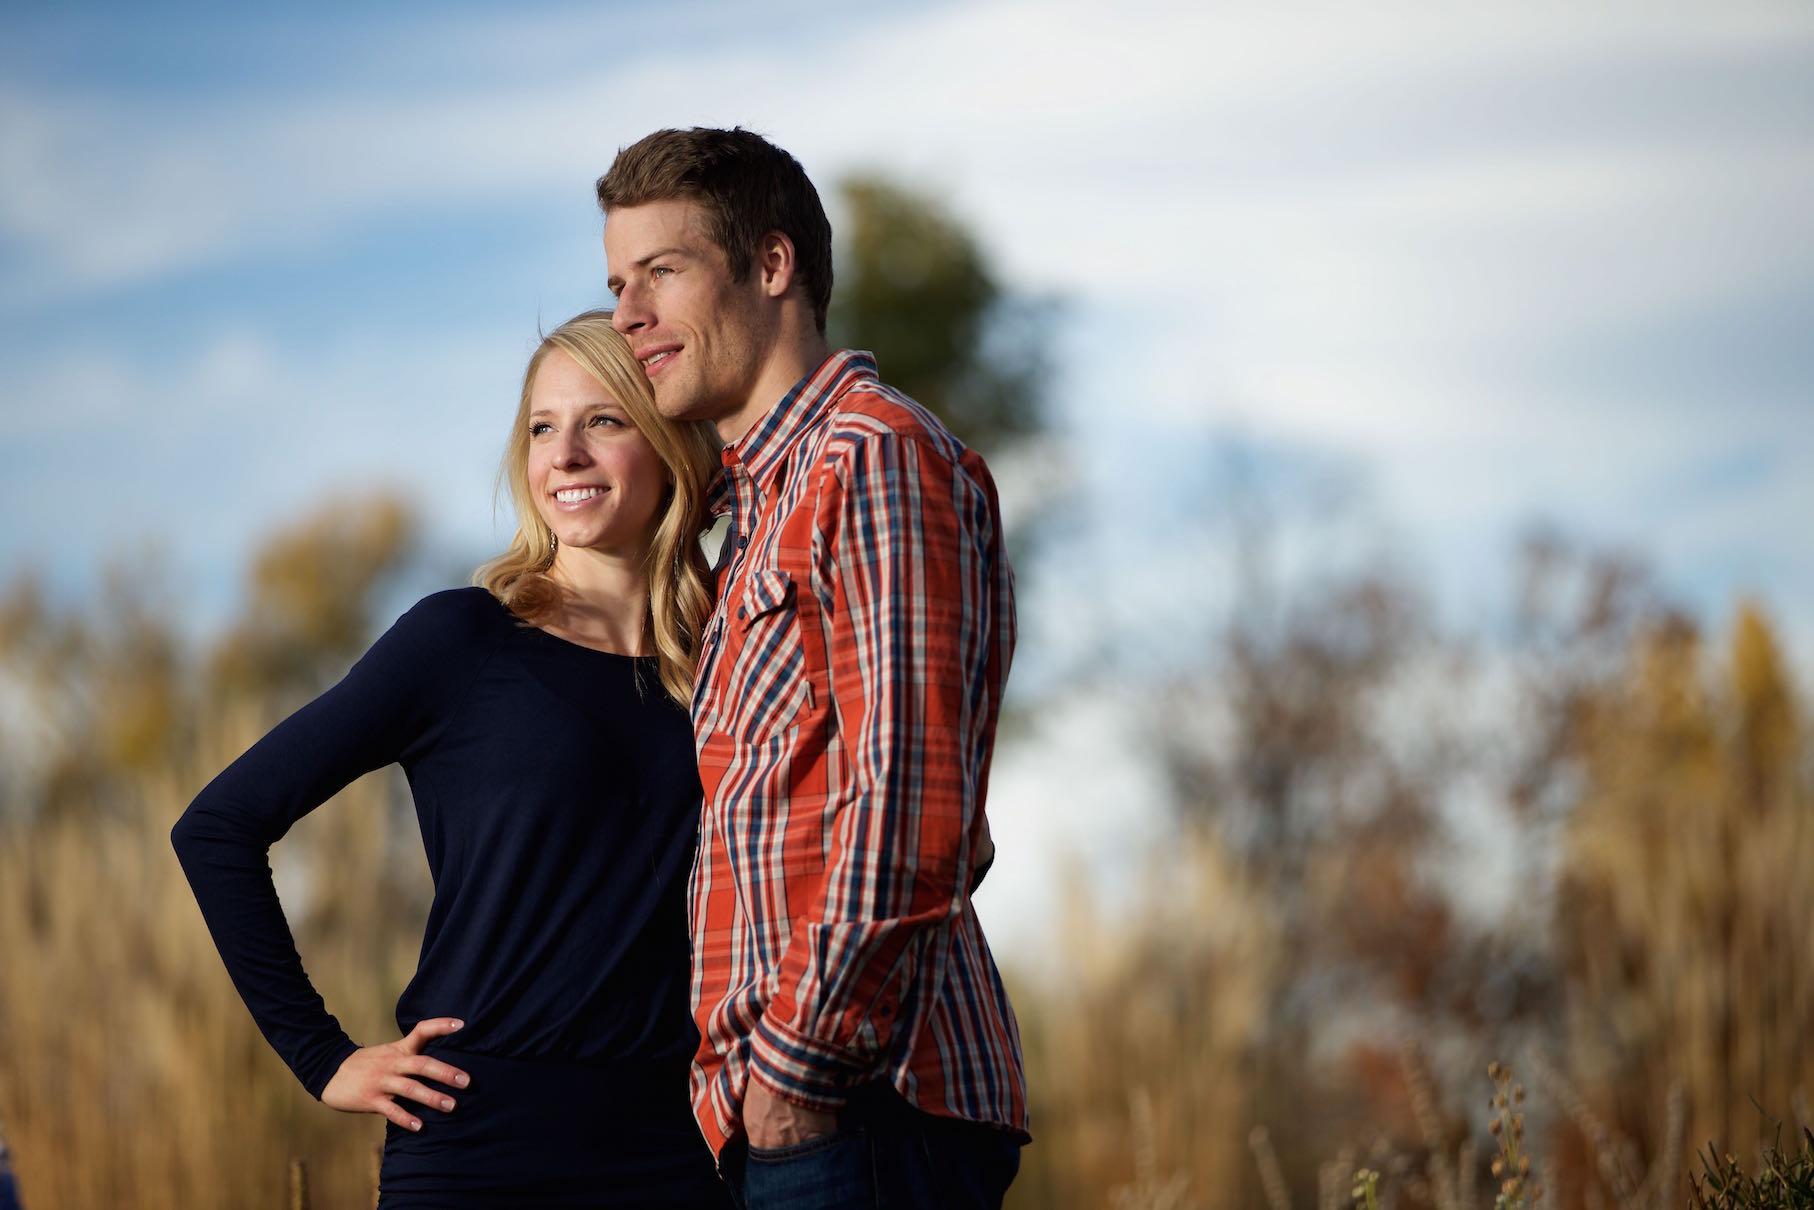 The Best Type Of Couples Photography Photo Shoot For Each Type Of  Relationship | YourTango